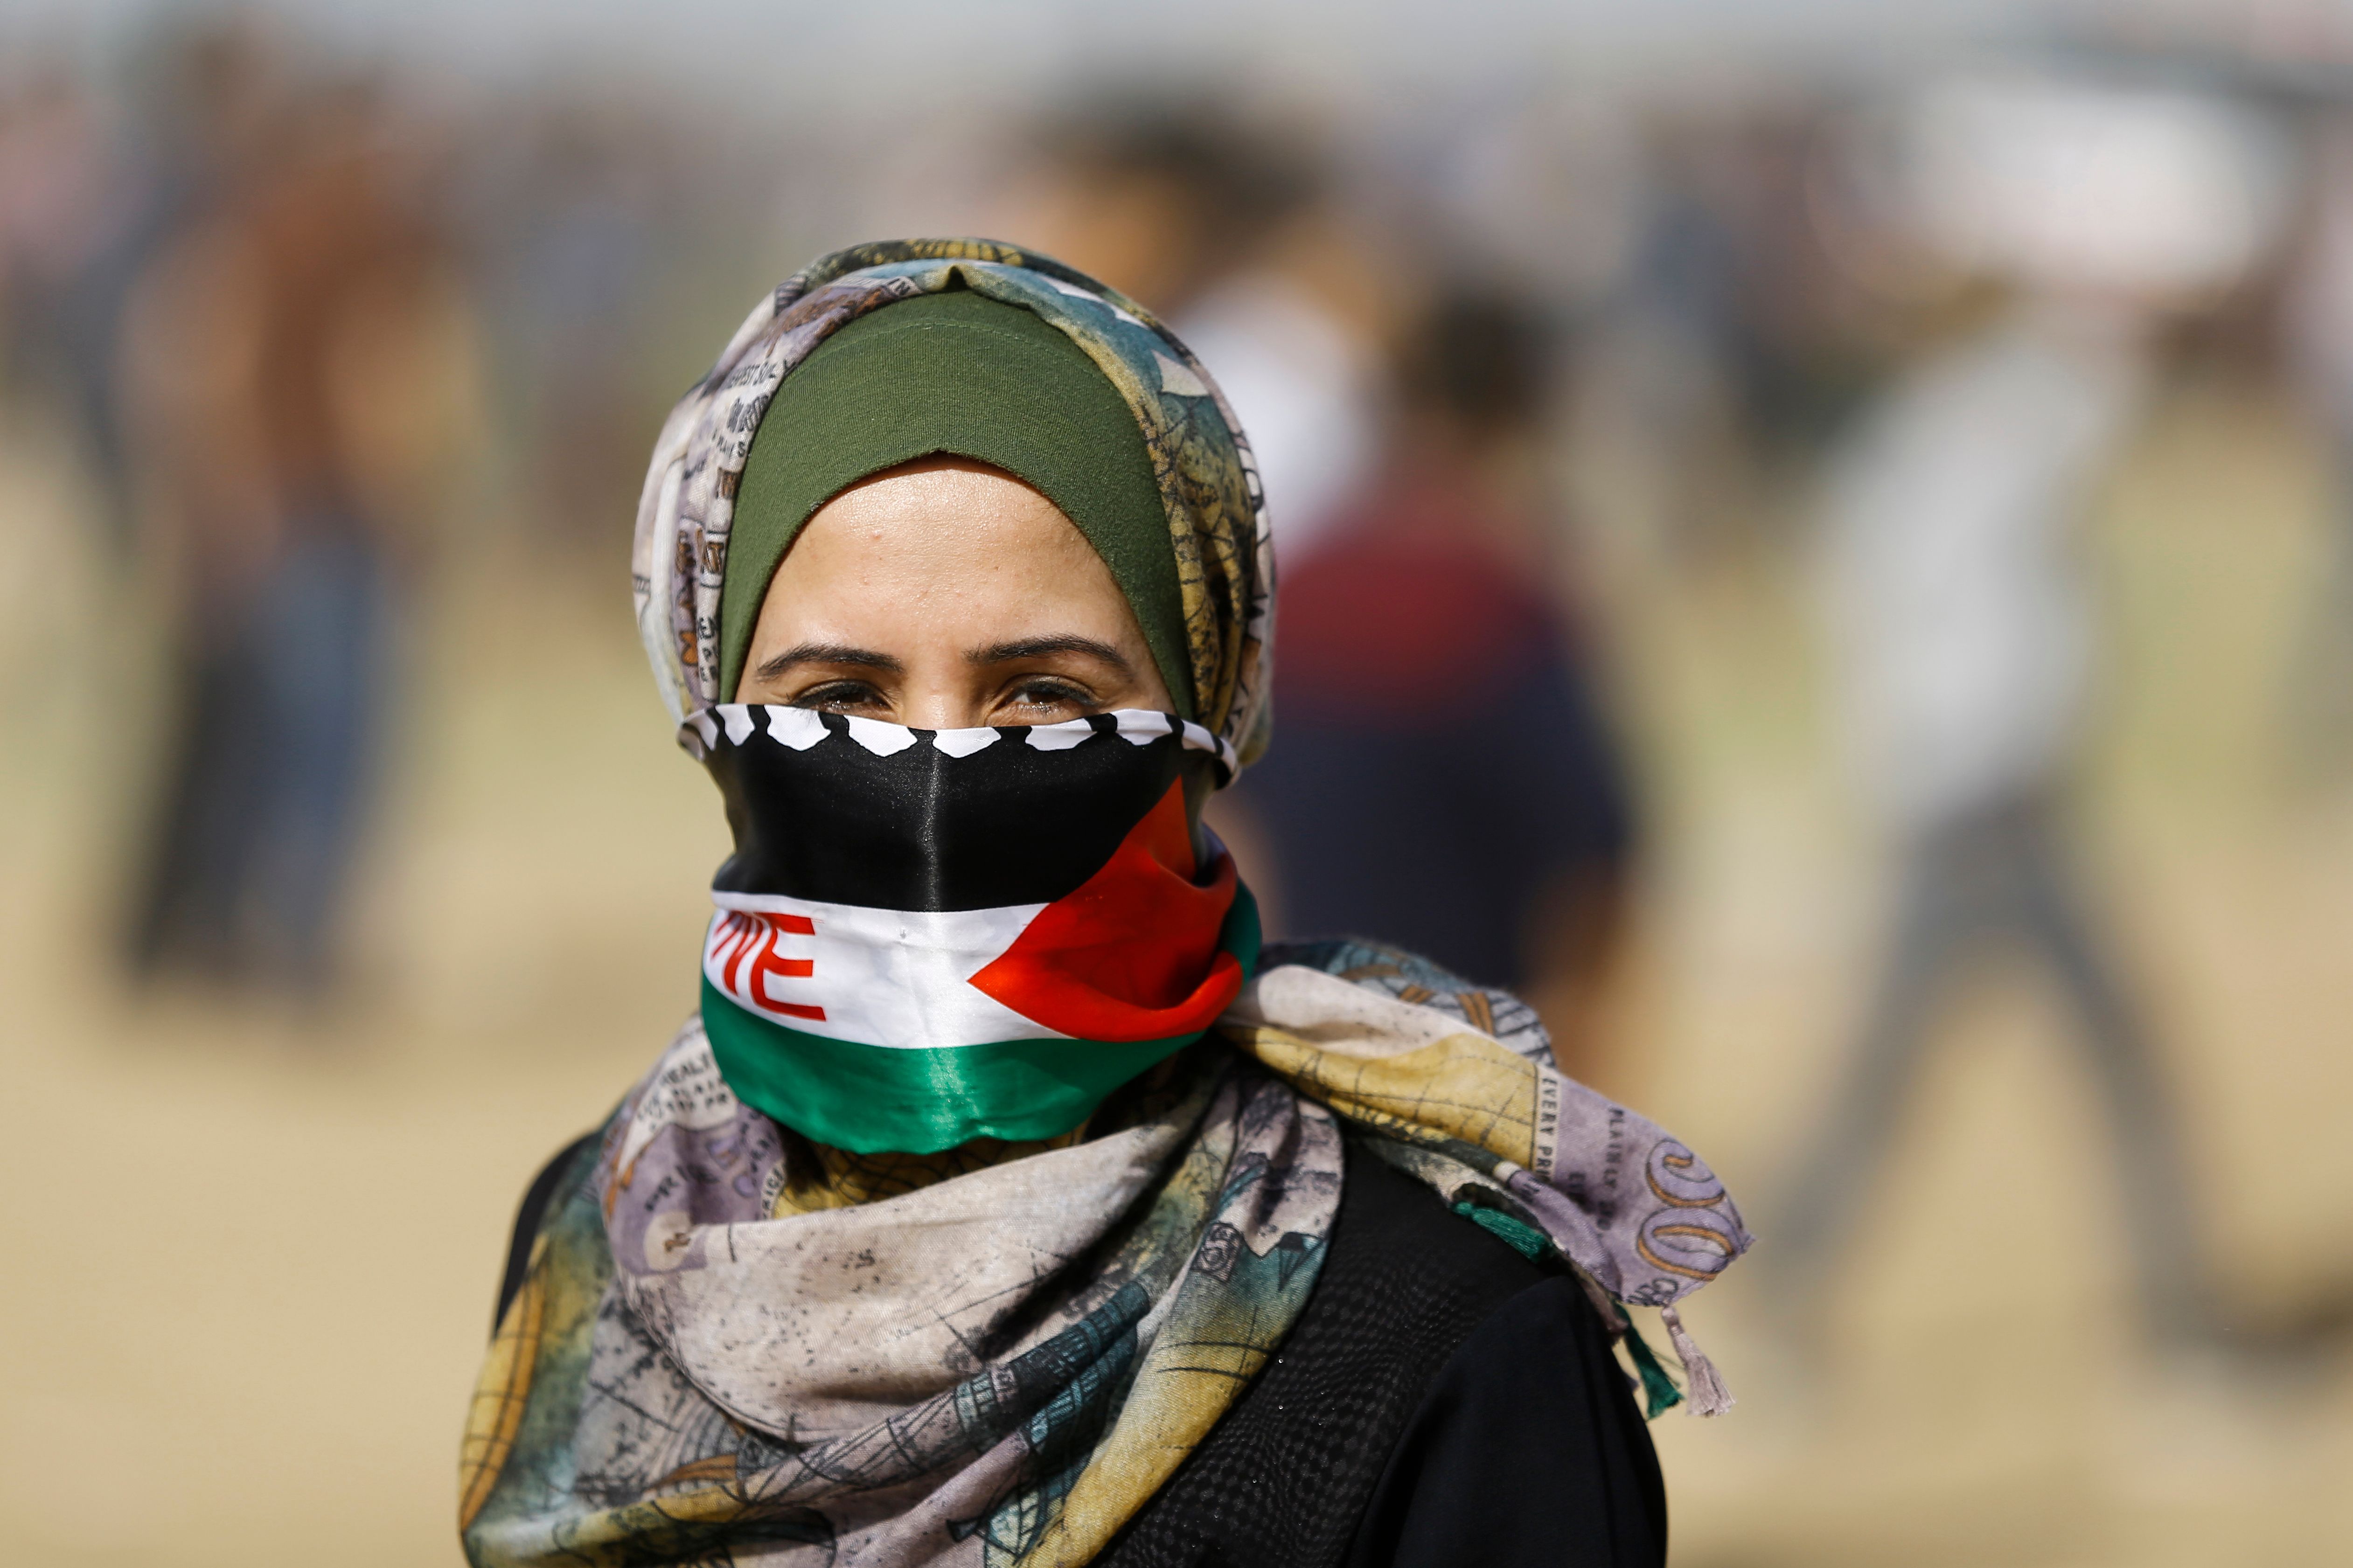 PALESTINIAN-ISRAEL-CONFLICT-GAZA-FEATURE-FACE MASKS